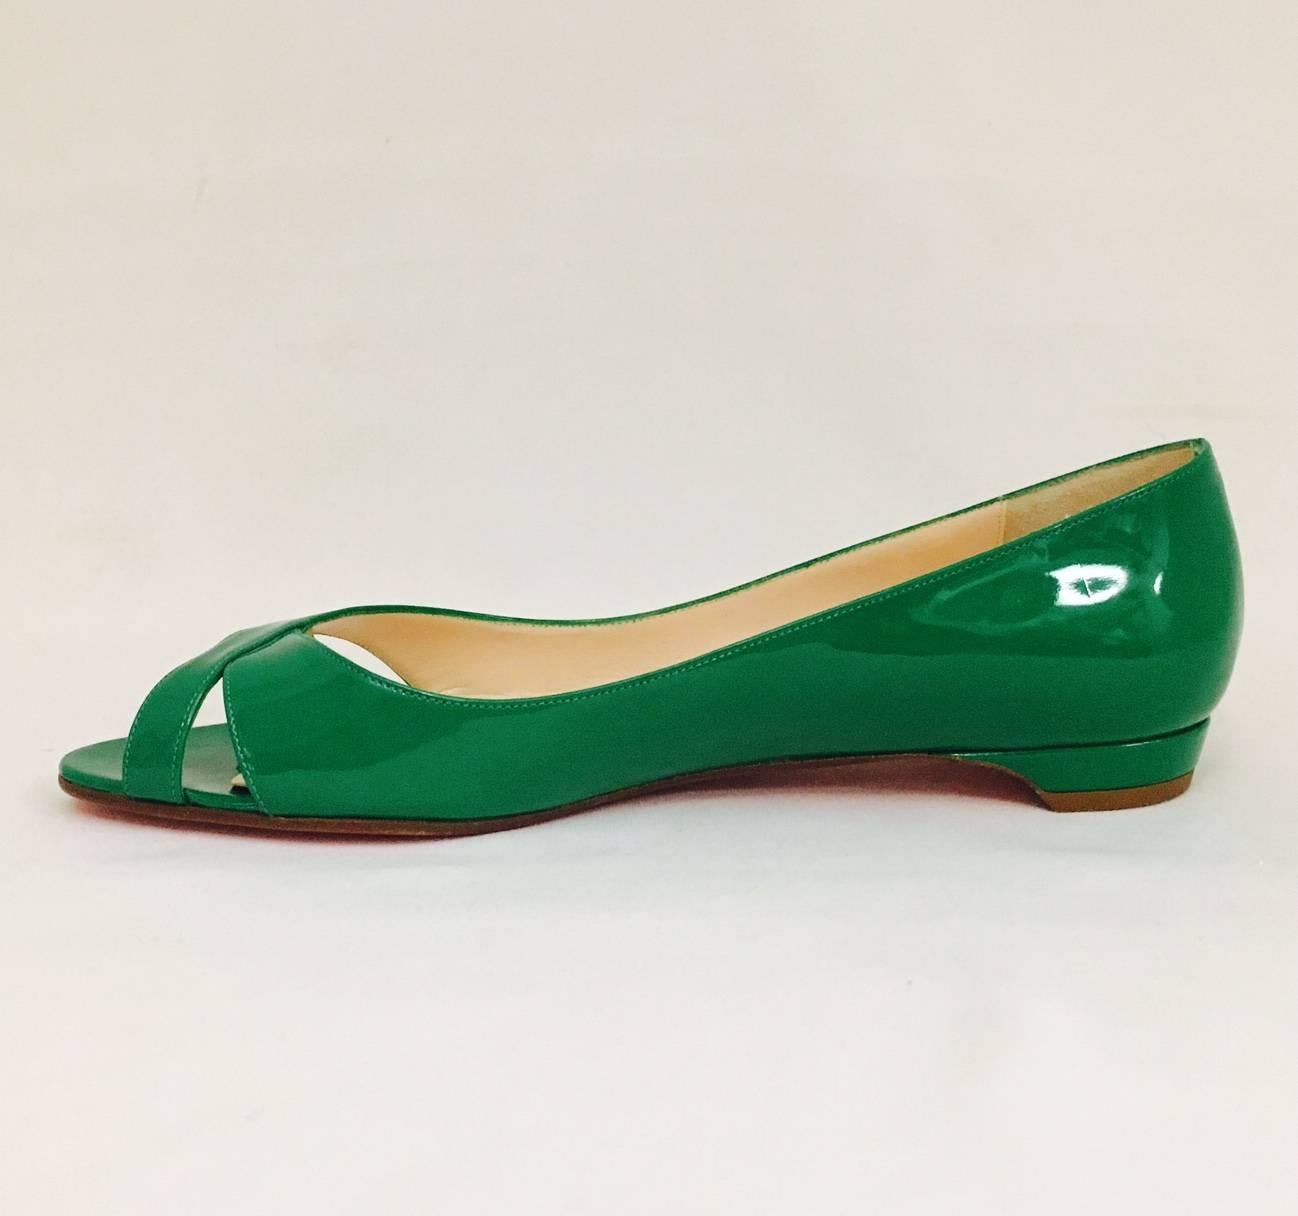 Christian Louboutin is so much more than skyscraper high heels!  These flats are crafted from luxurious Emerald Green Patent Leather and feature criss-cross vamps with cutouts and peep toes.  Beige and suede lining and sculpted heels finish the